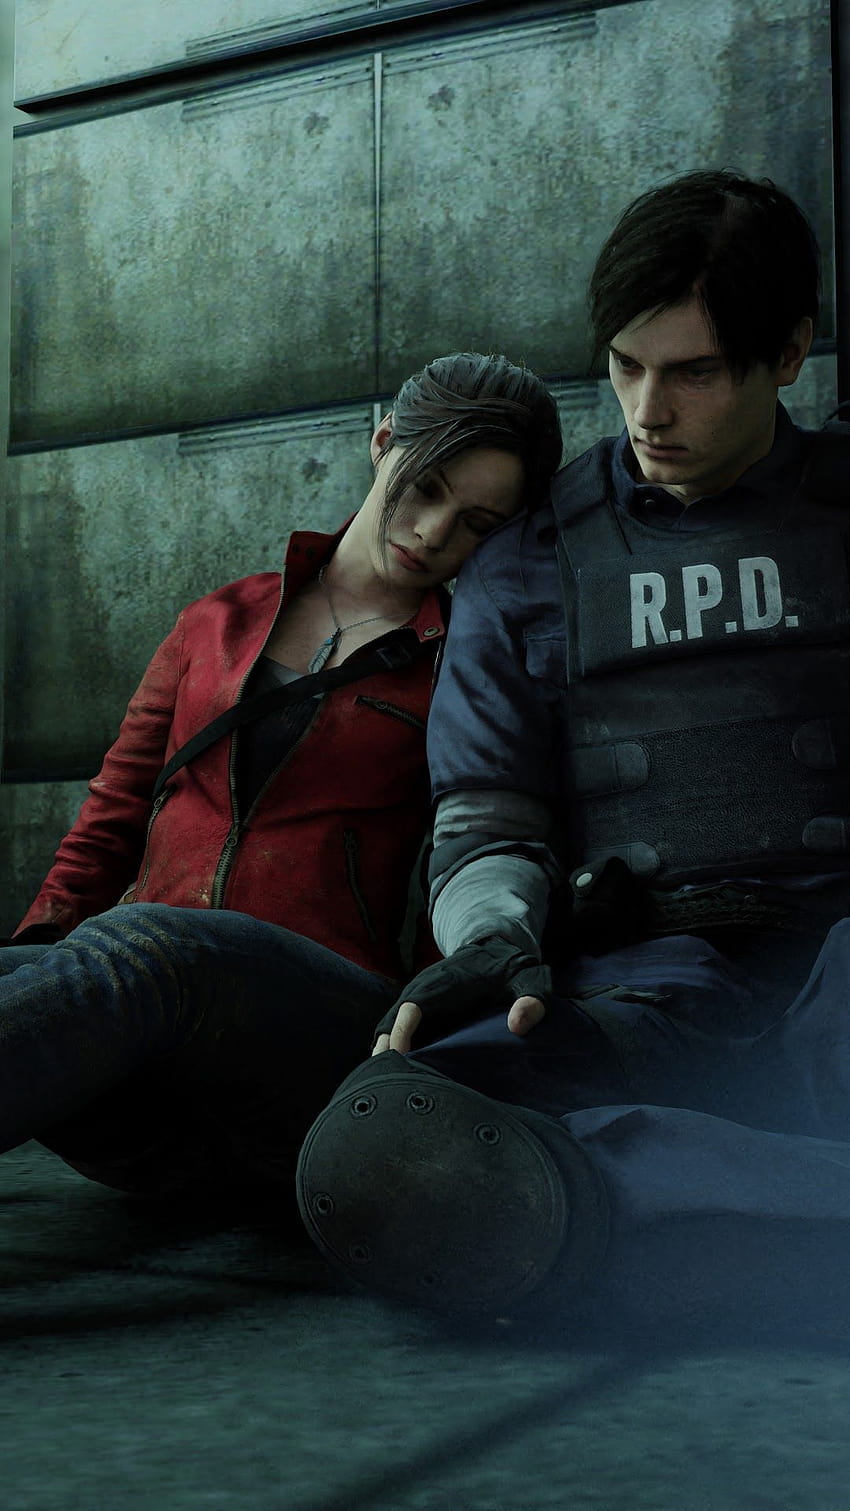 Claire Redfield Leon S. Kennedy Resident Evil 2, leon kennedy dan claire redfield wallpaper ponsel HD